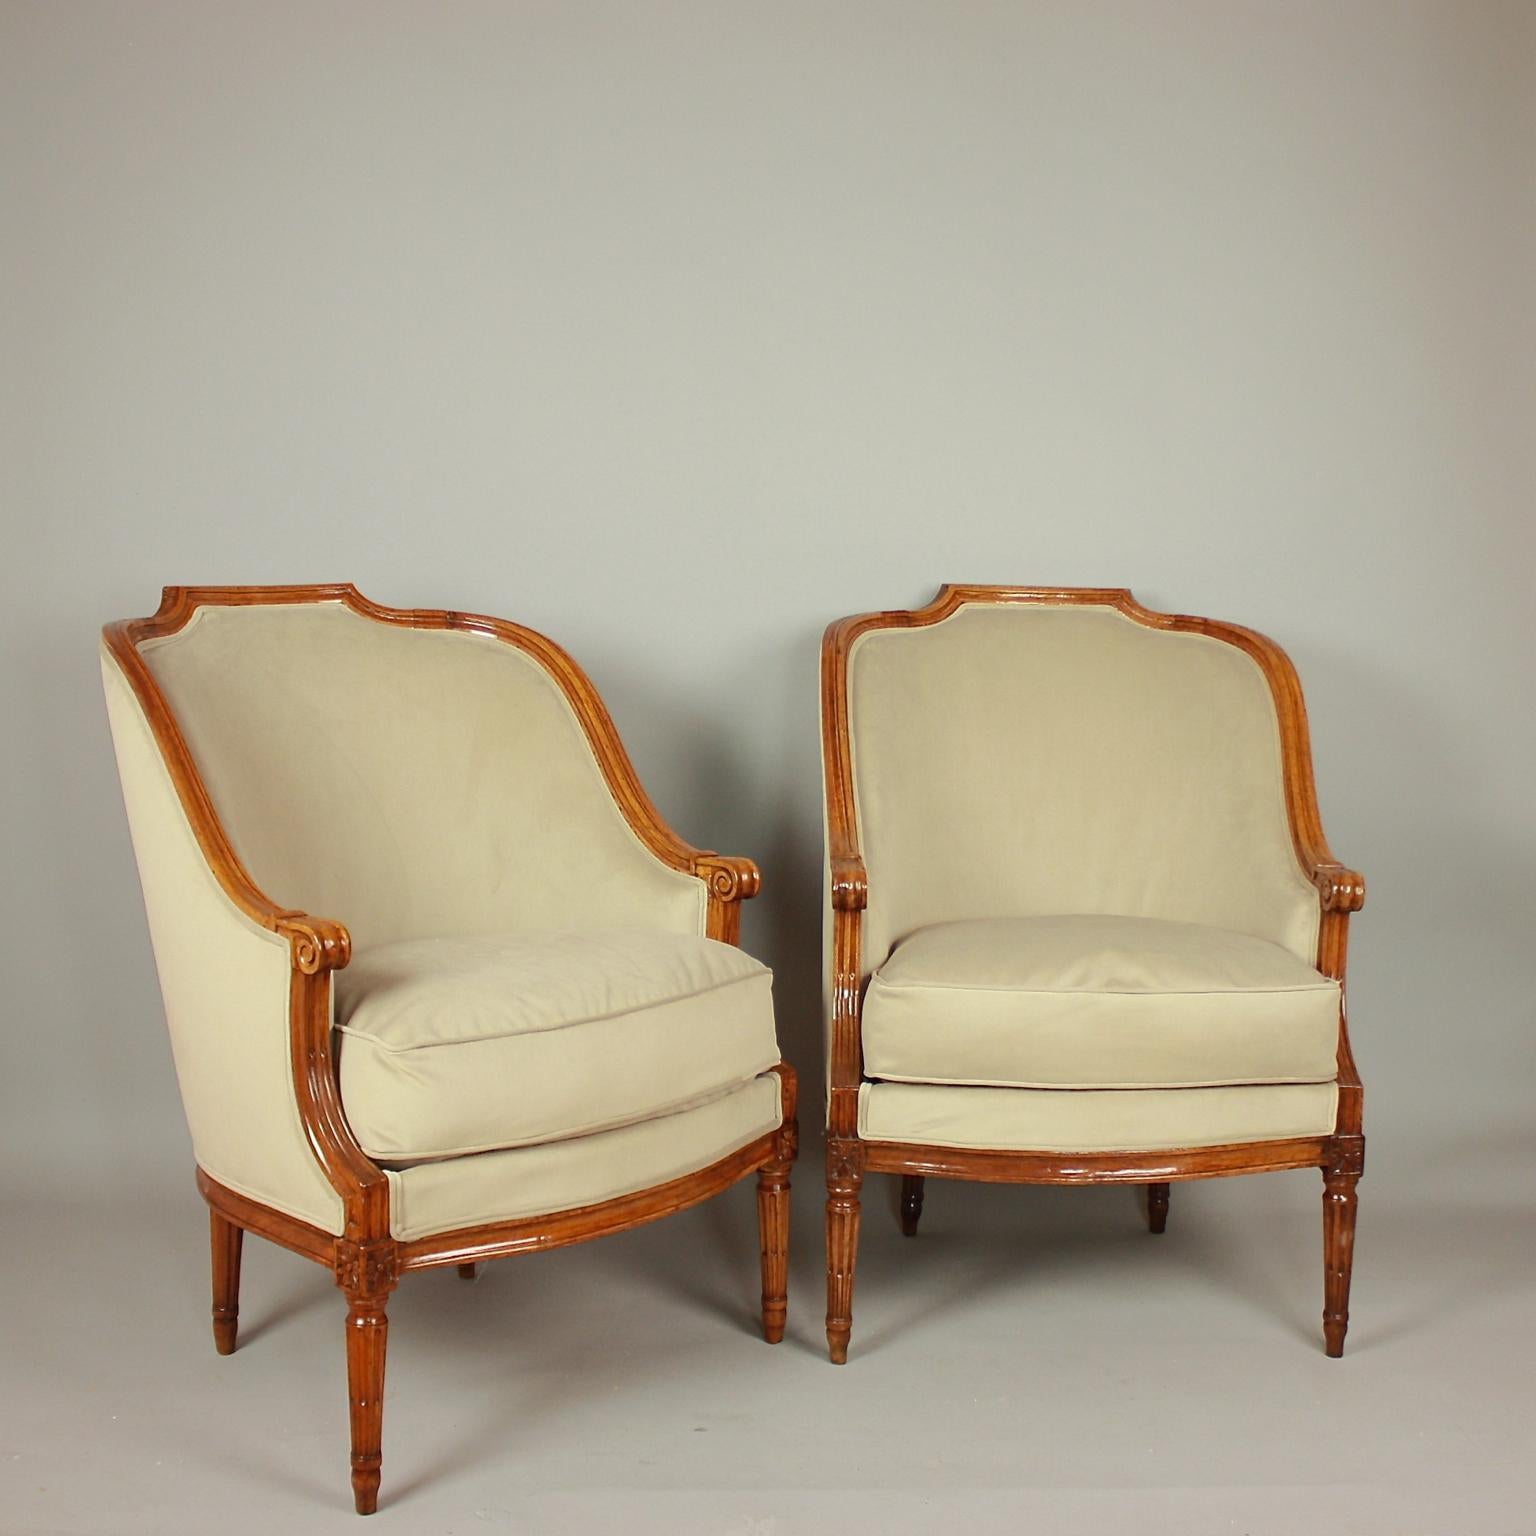 A pair of walnut bergeres or armchairs, each with a curved padded back. The top rail shaped to form a shallow arched and fluted top. The arm-rests descend to a spiral scroll to overlap the arm-supports, which sweep down again to meet the front legs.